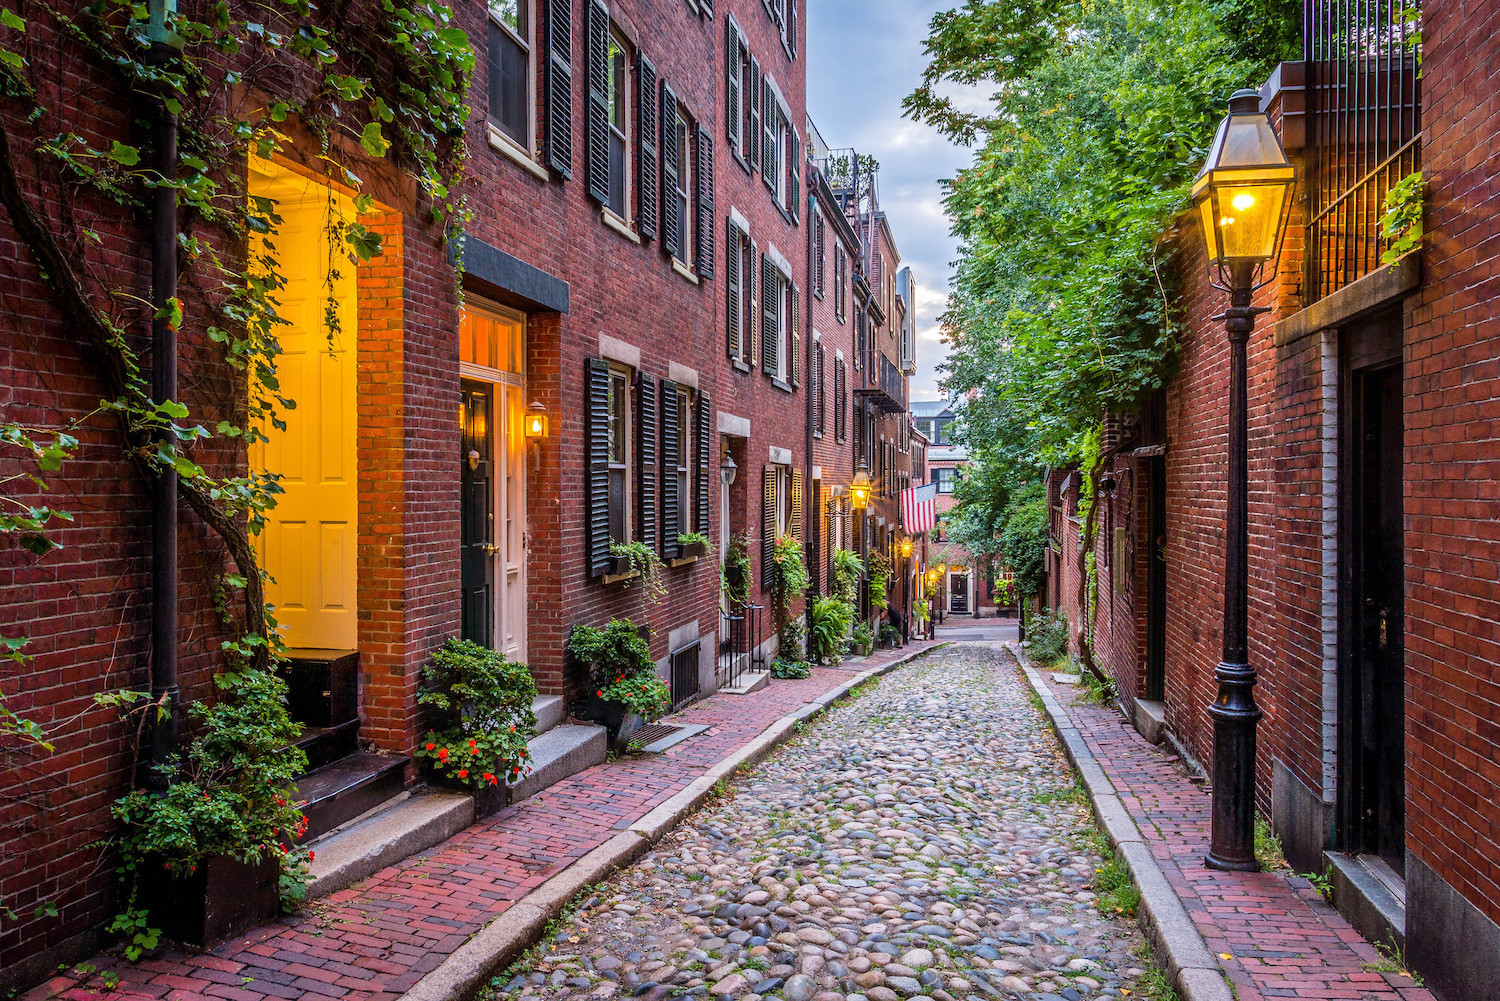 A view of the narrow streets in Boston’s North End neighborhood.